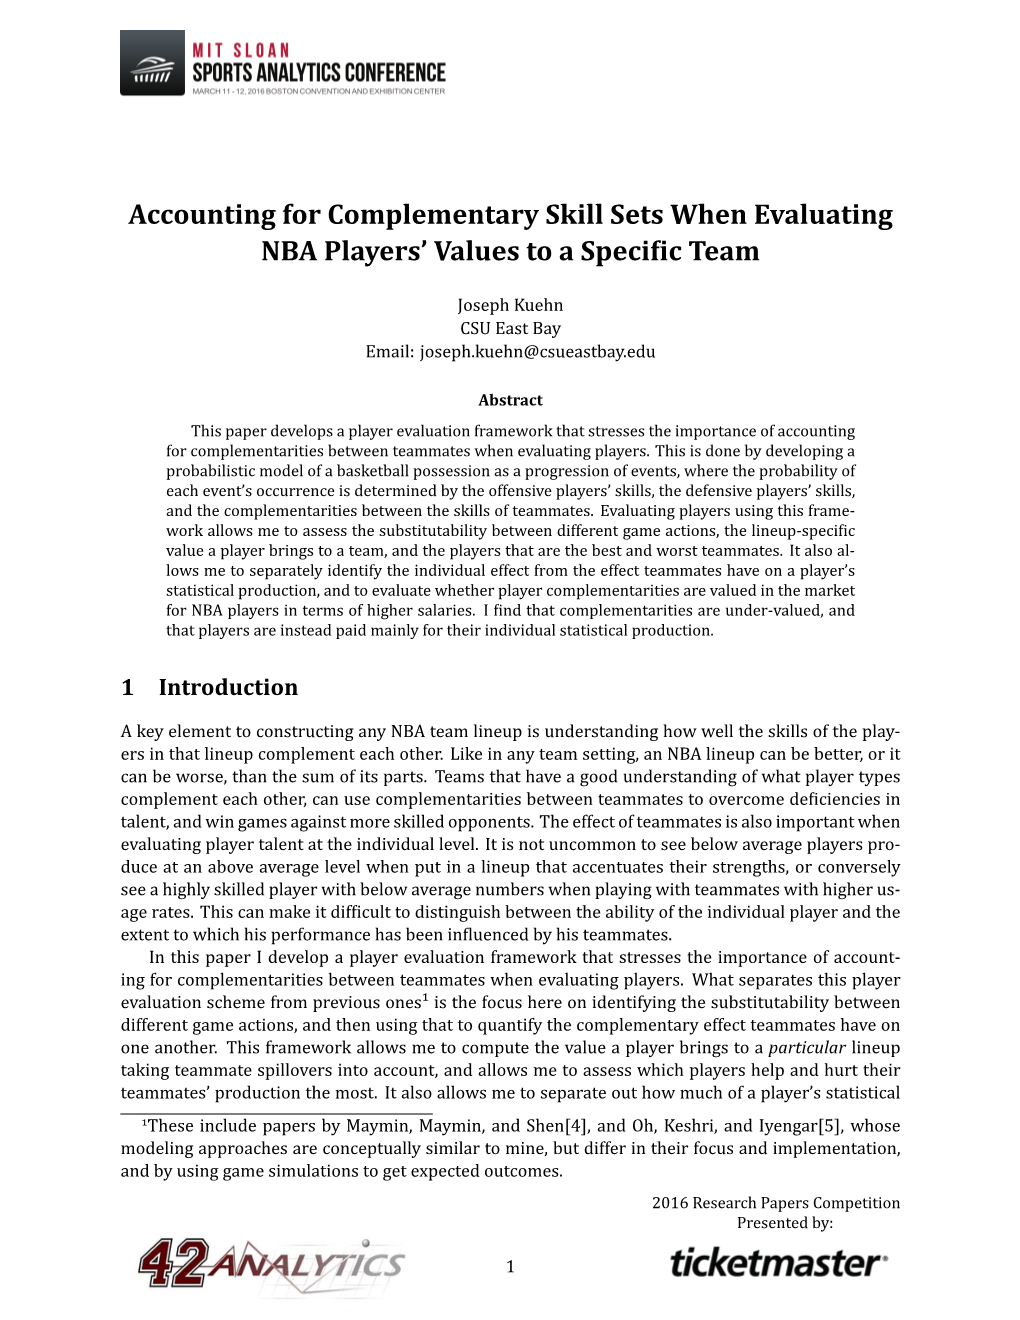 Accounting for Complementary Skill Sets When Evaluating NBA Players’ Values to a Speci�Ic Team